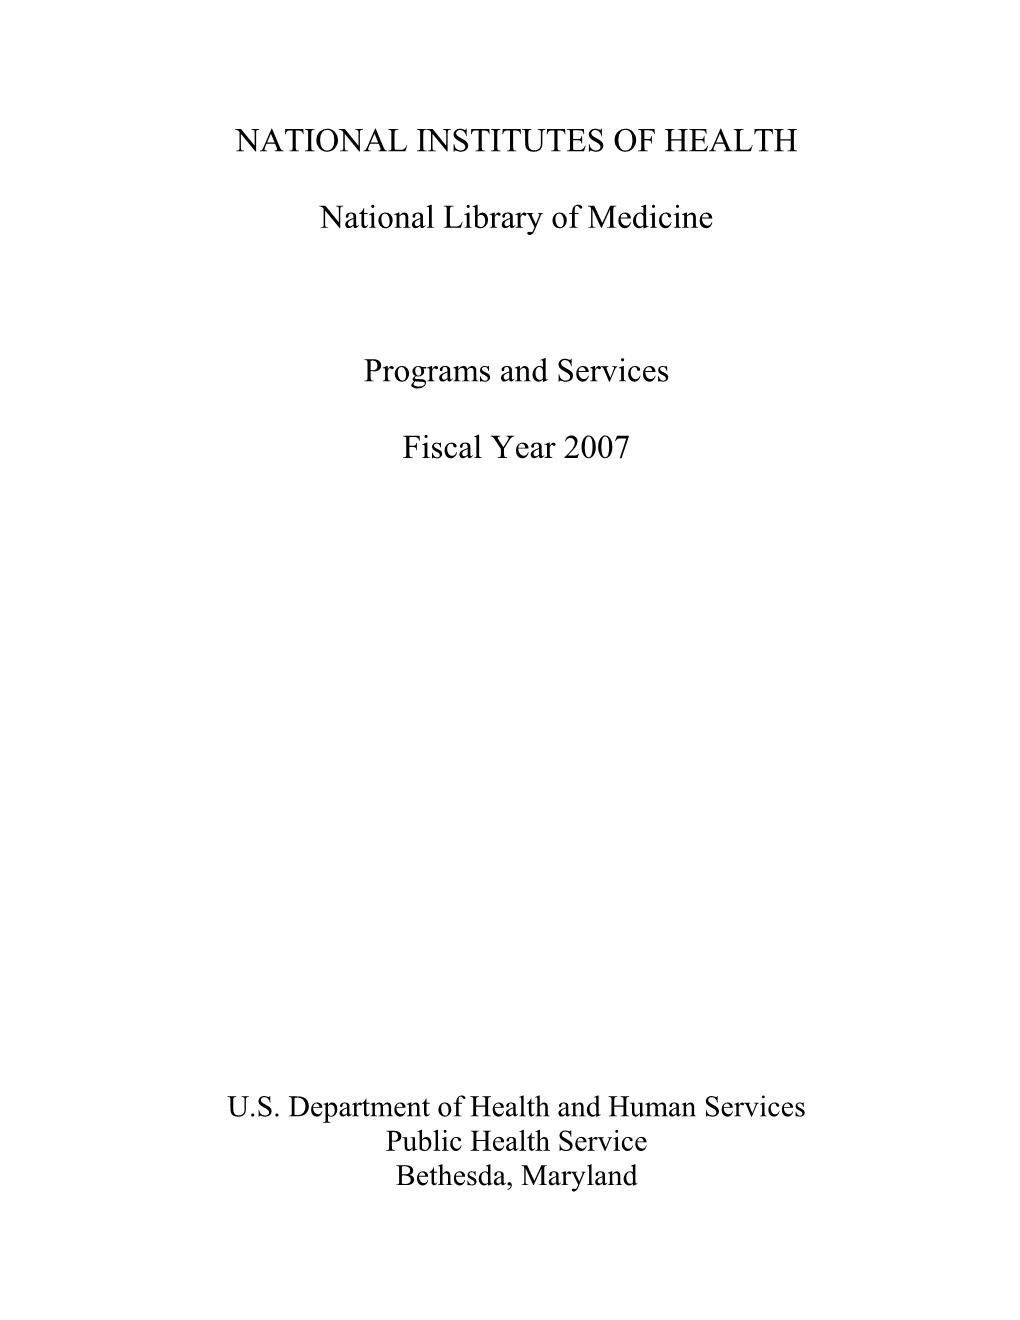 Programs and Services FY2007